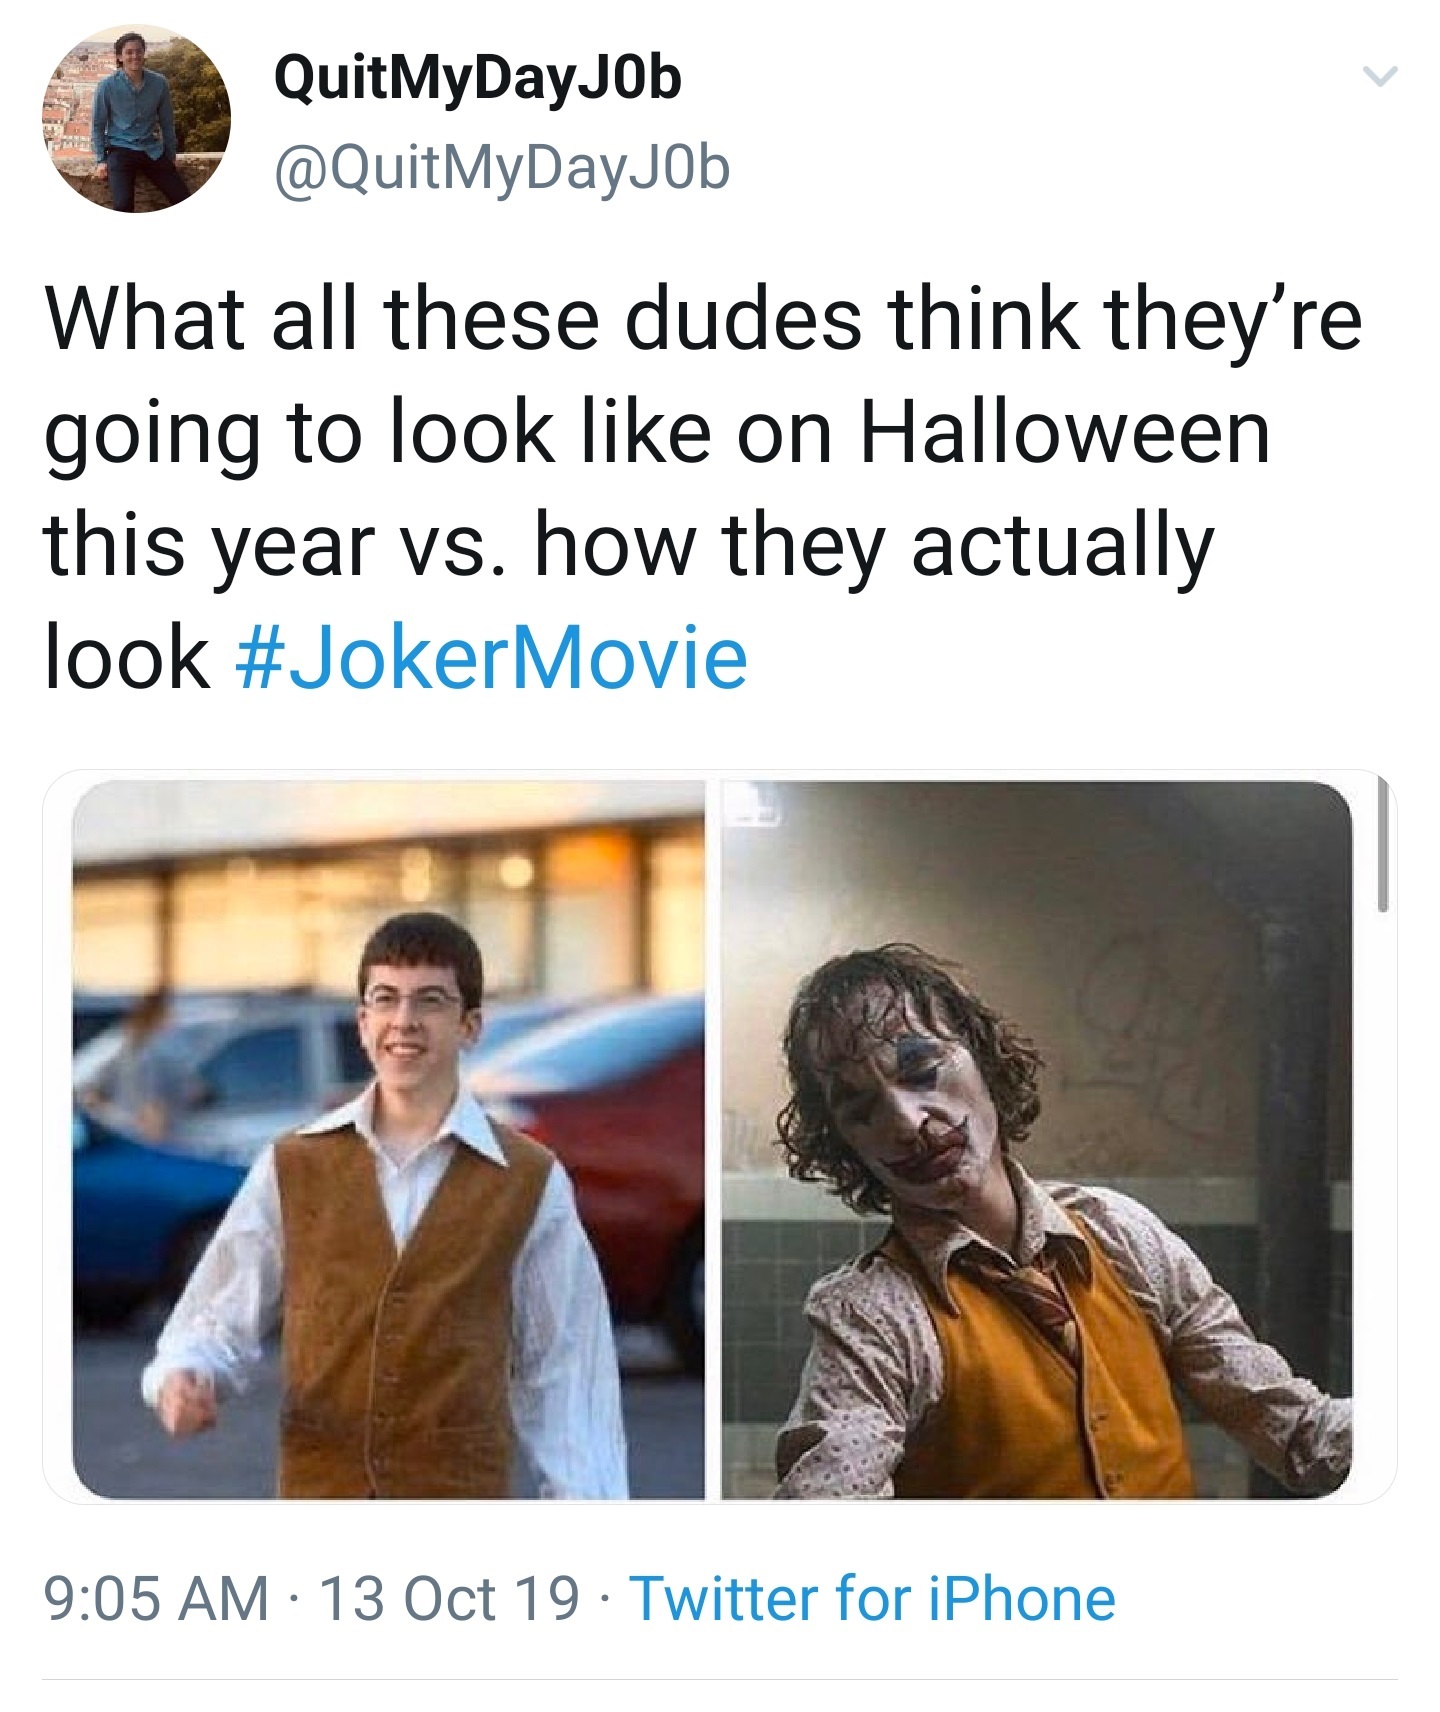 What all these dudes think they're going to look on Halloween this year vs. how they actually look Movie 13 Oct 19. Twitter for iPhone